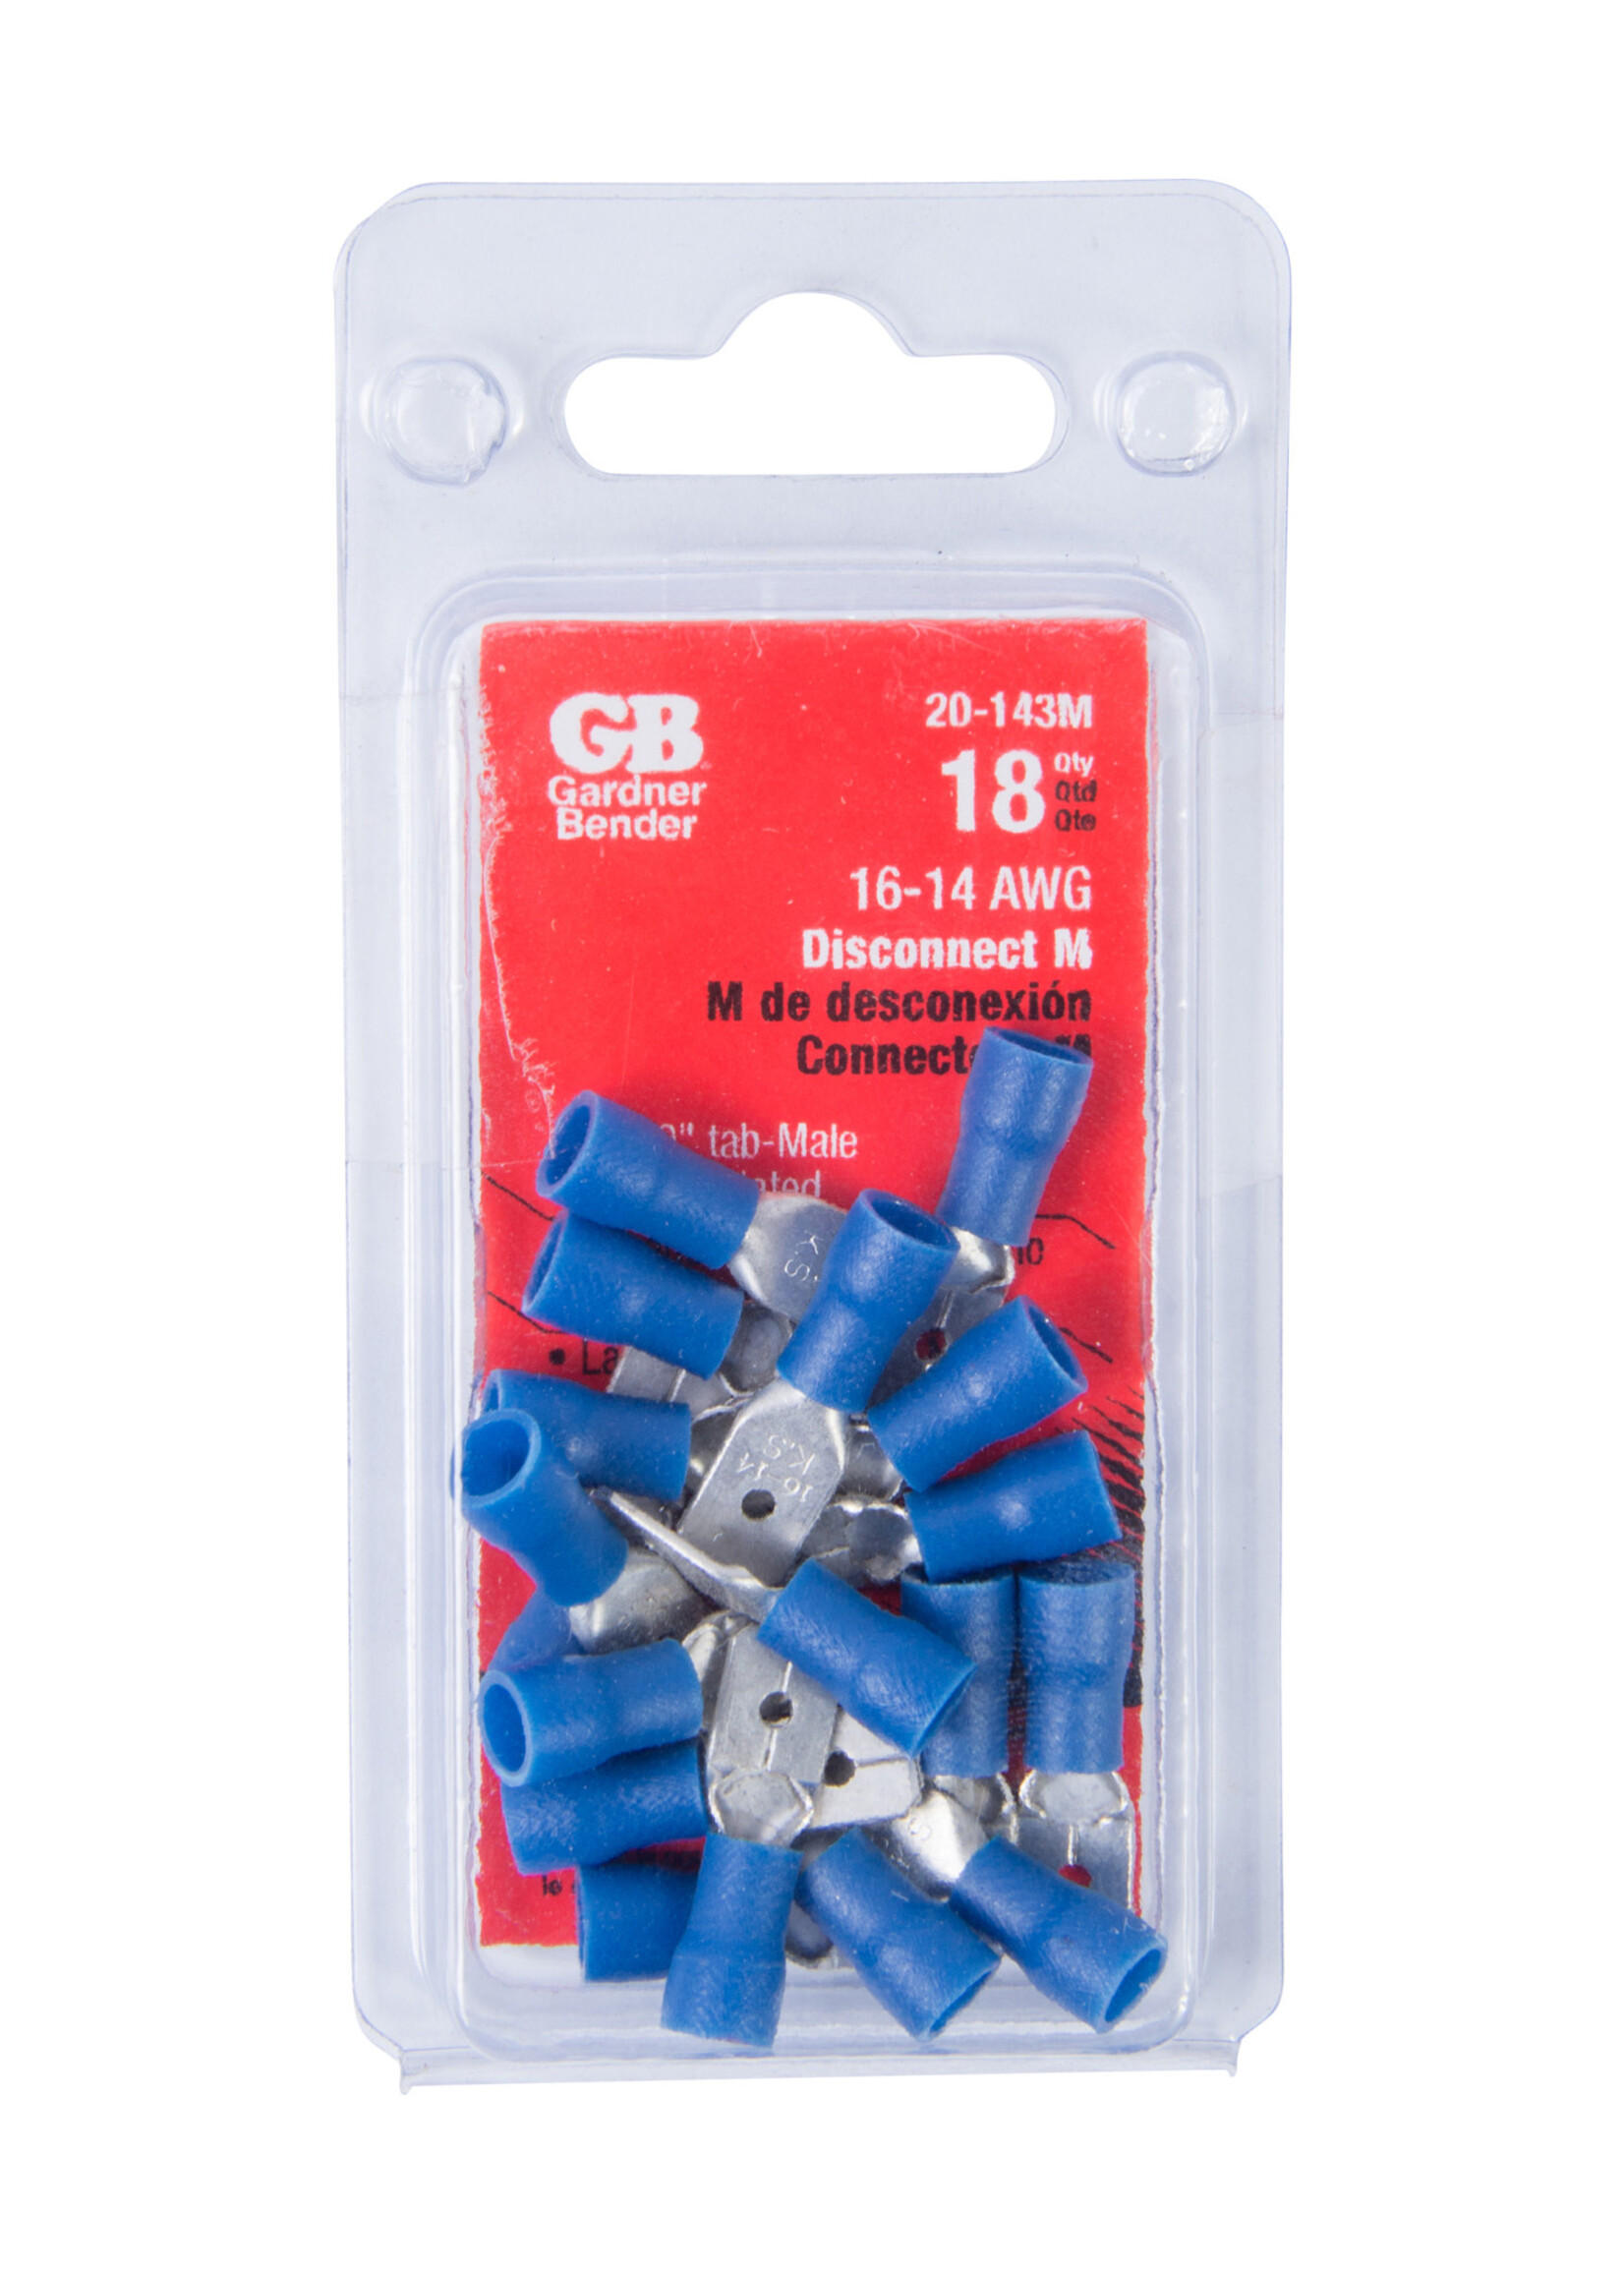 GARDNER BENDER #16-#14 AWG (2 mm²) Vinyl-Insulated Disconnect (0.25" Tab) - Male / 20-143M